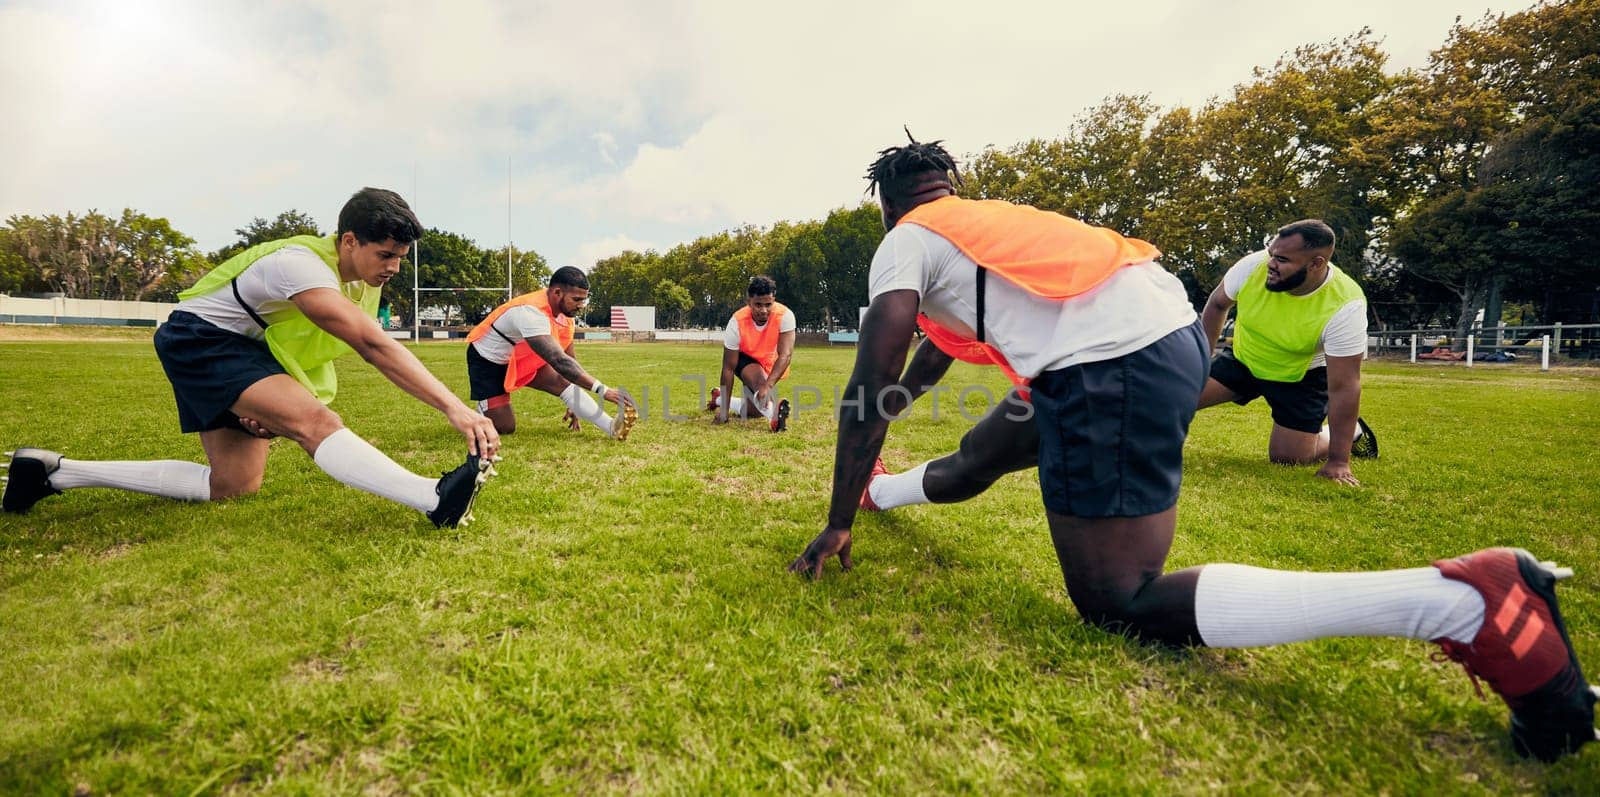 Sports, training and men outdoor for rugby on grass field with diversity team stretching as warm up. Athlete group together for fitness, exercise and workout for professional sport or teamwork energy by YuriArcurs